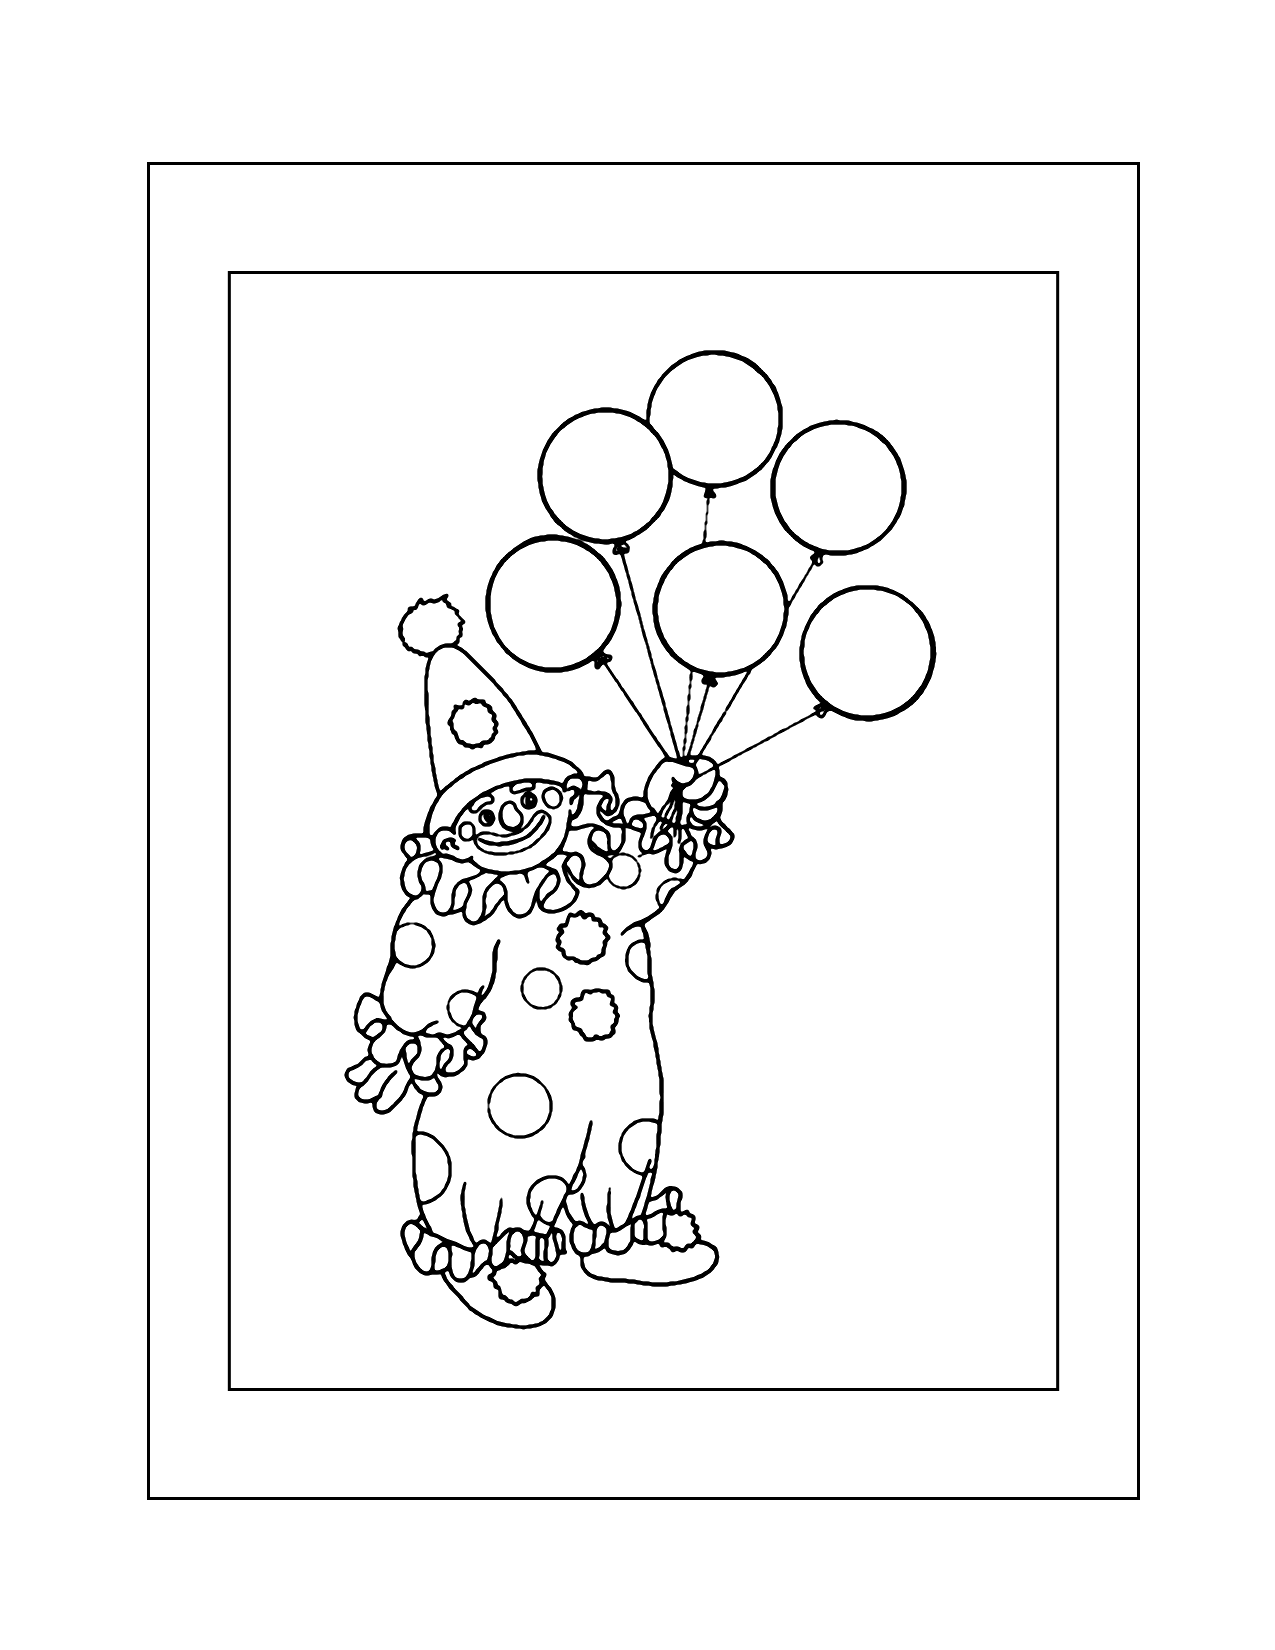 Clown With Balloons Coloring Page